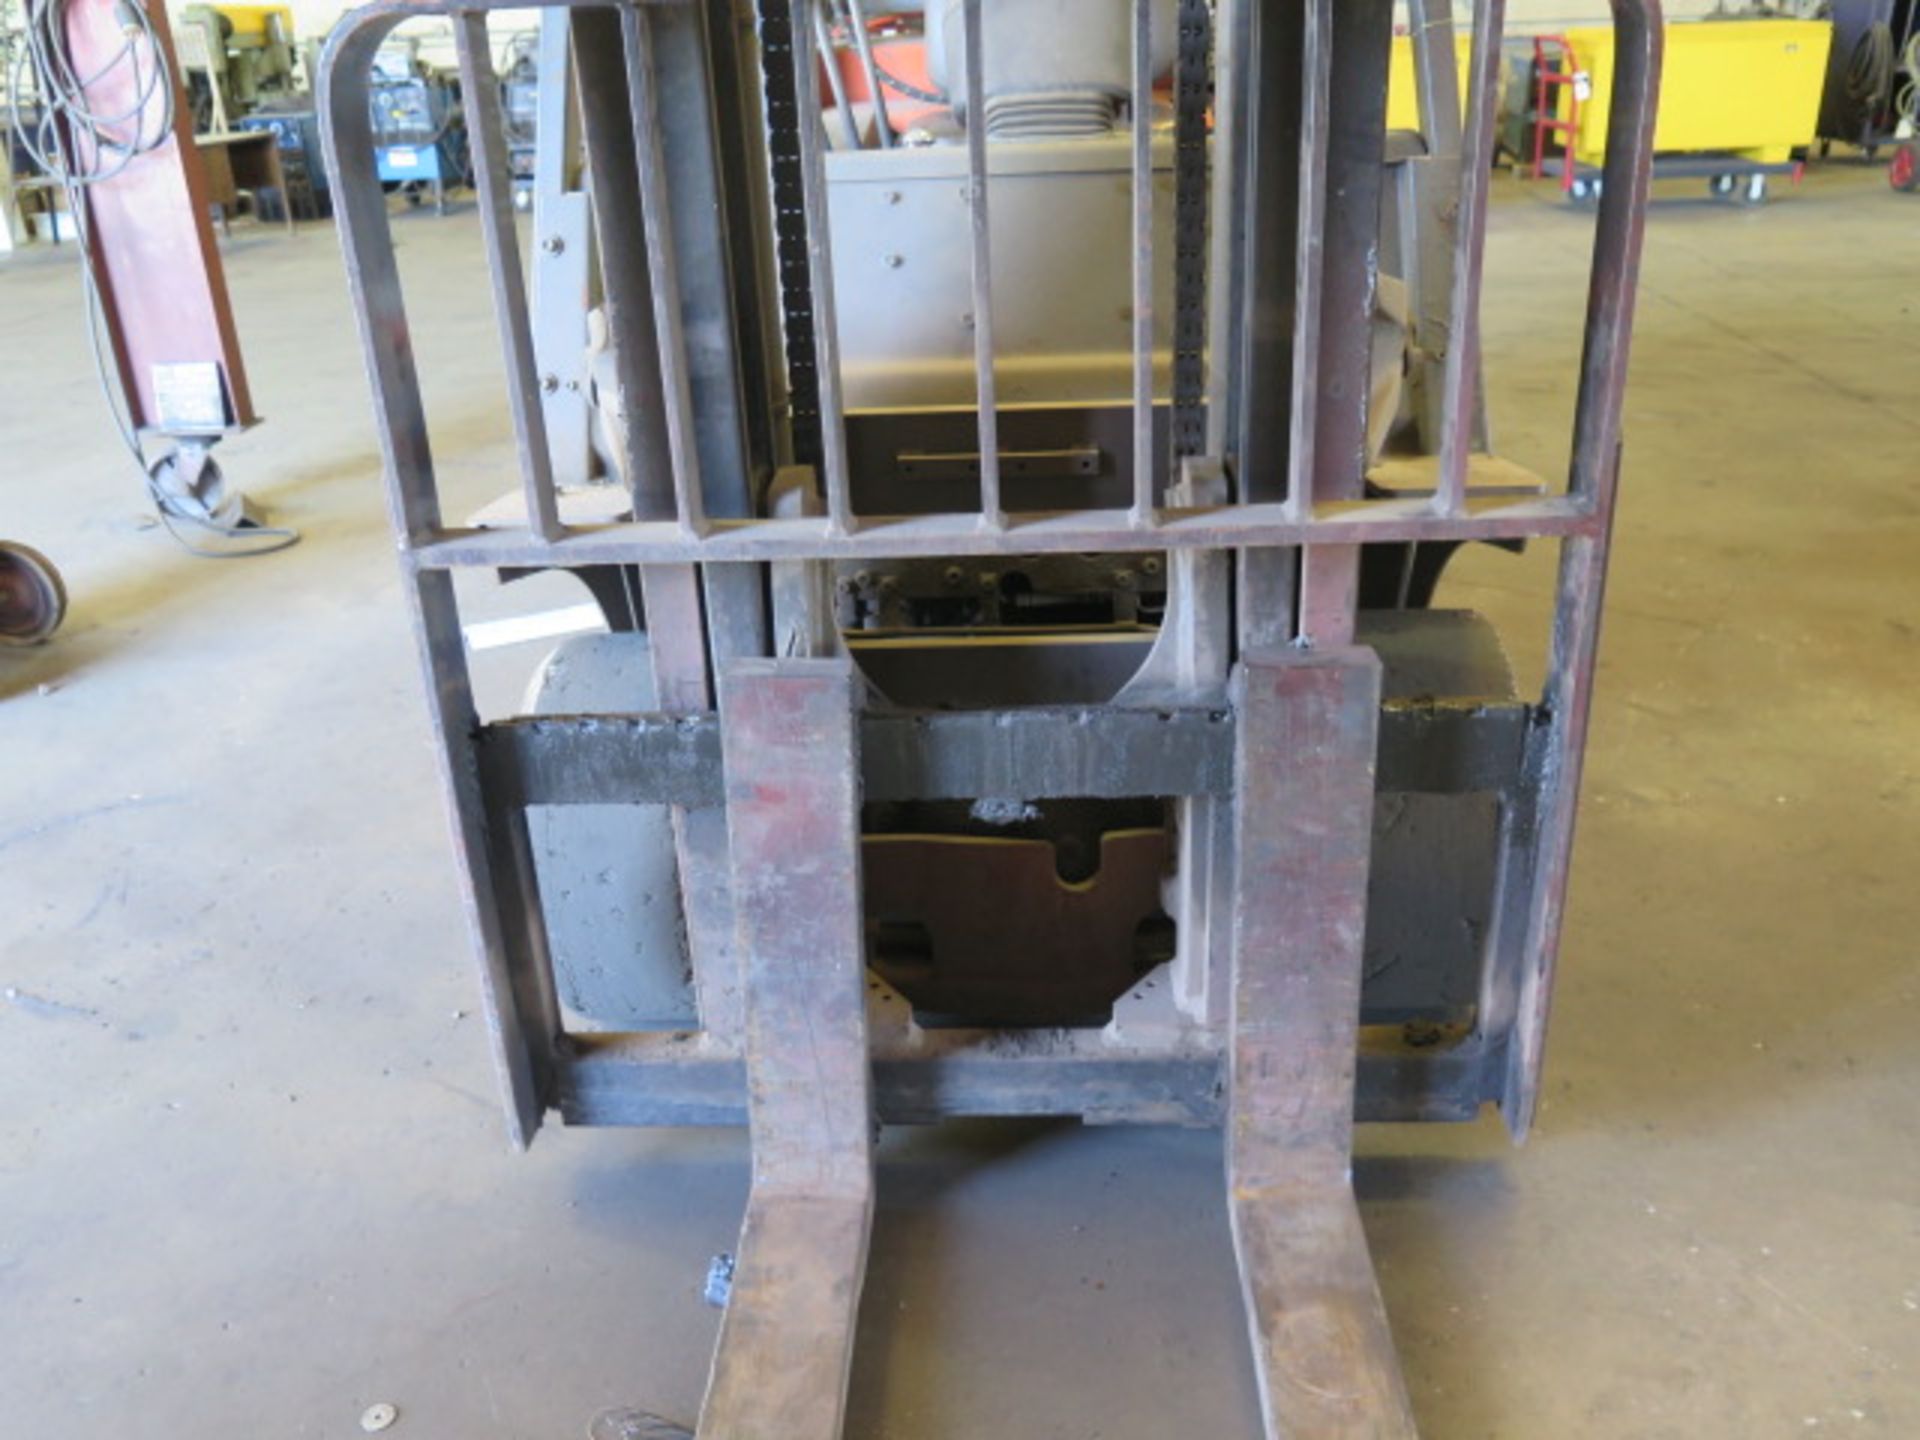 Toyota 52-6FGCU35 8000 Lb Cap LPG Forklift s/n 60547 w/ 2-Stage Mast, 131" Lift Height, SOLD AS IS - Image 4 of 13